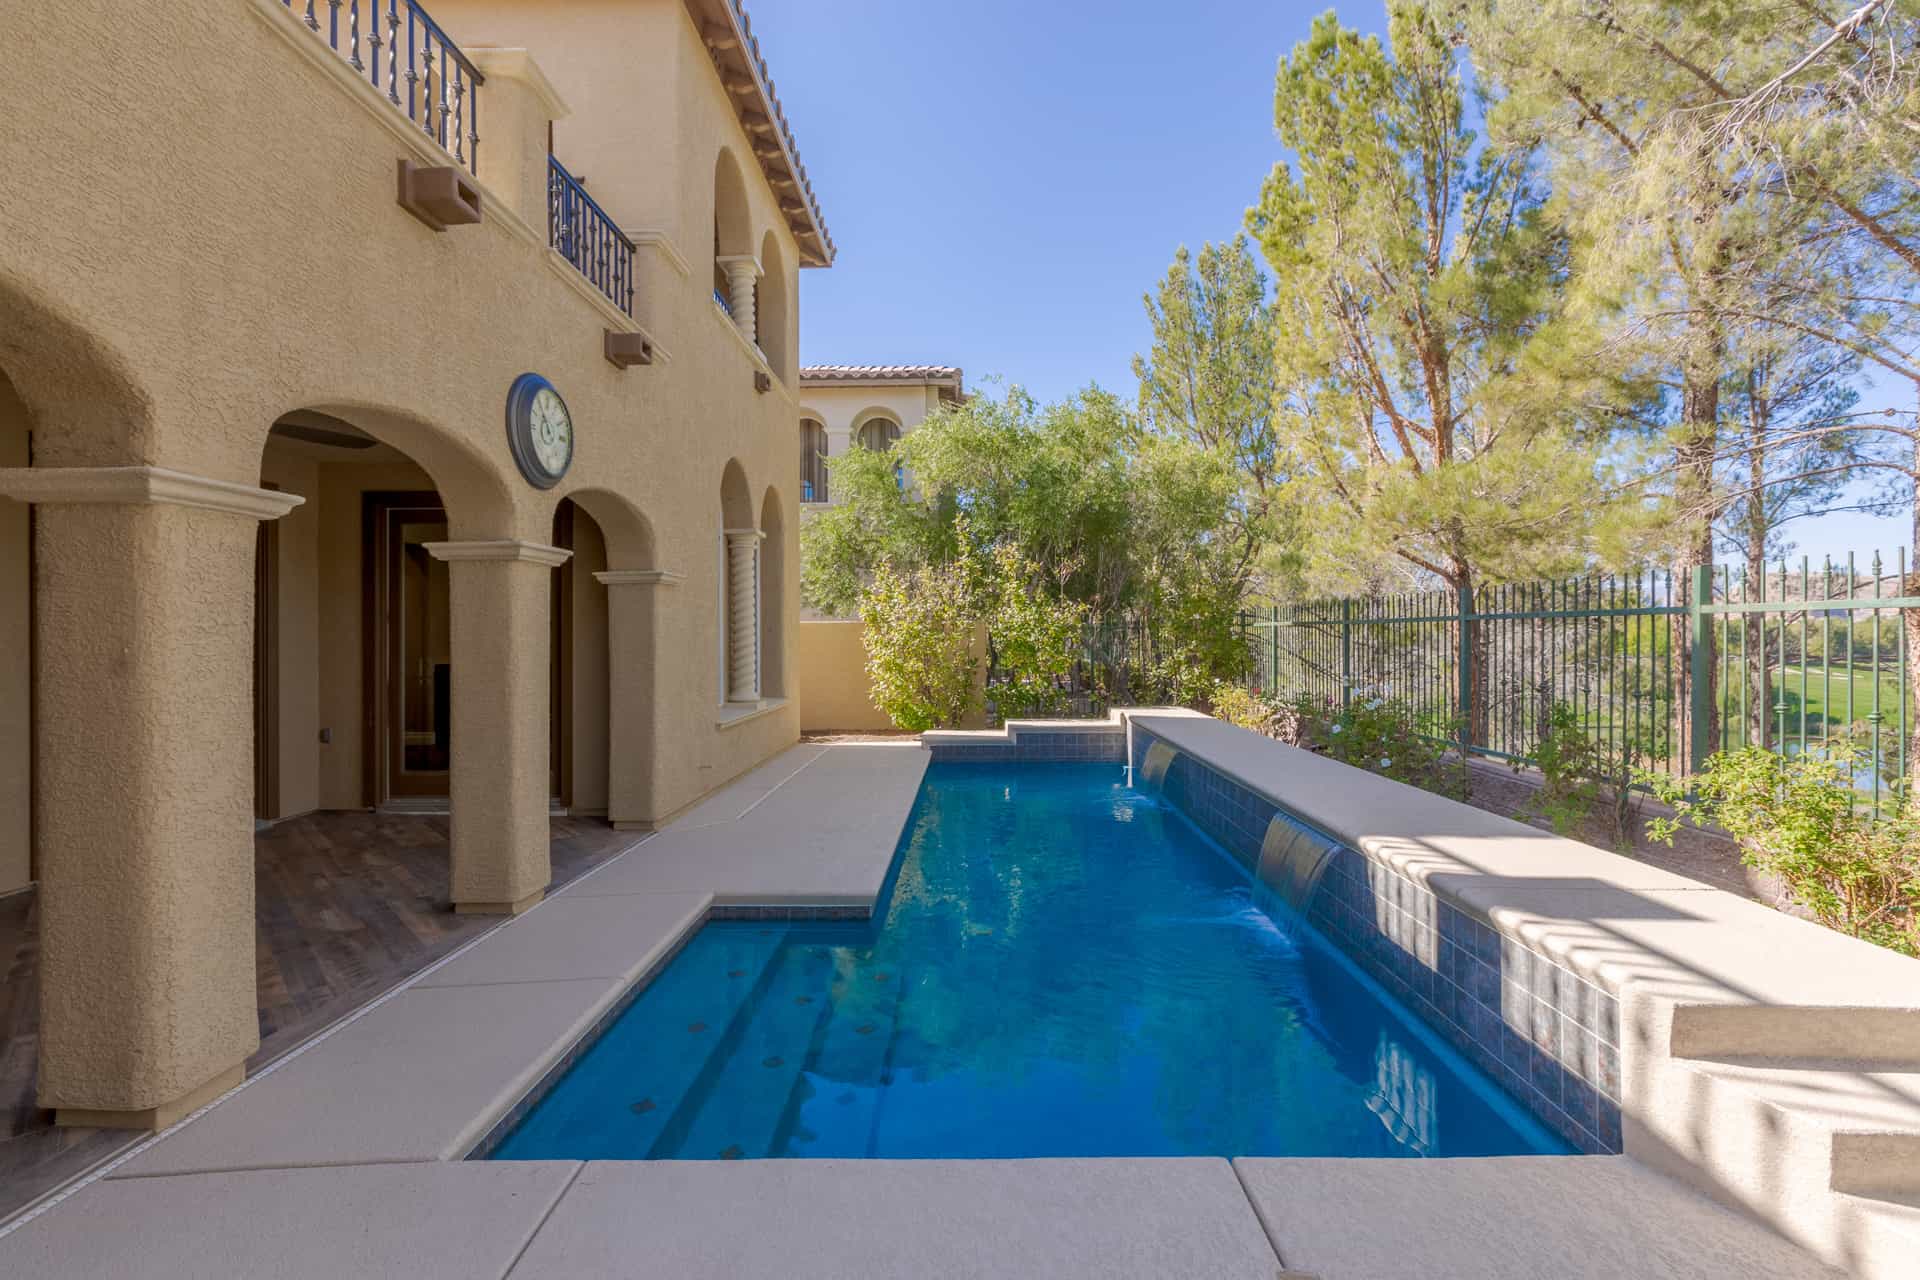 las-vegas-luxry-real-estate-realtor-rob-jensen-company-11772-canons-brooks-drive-southern-highlands42